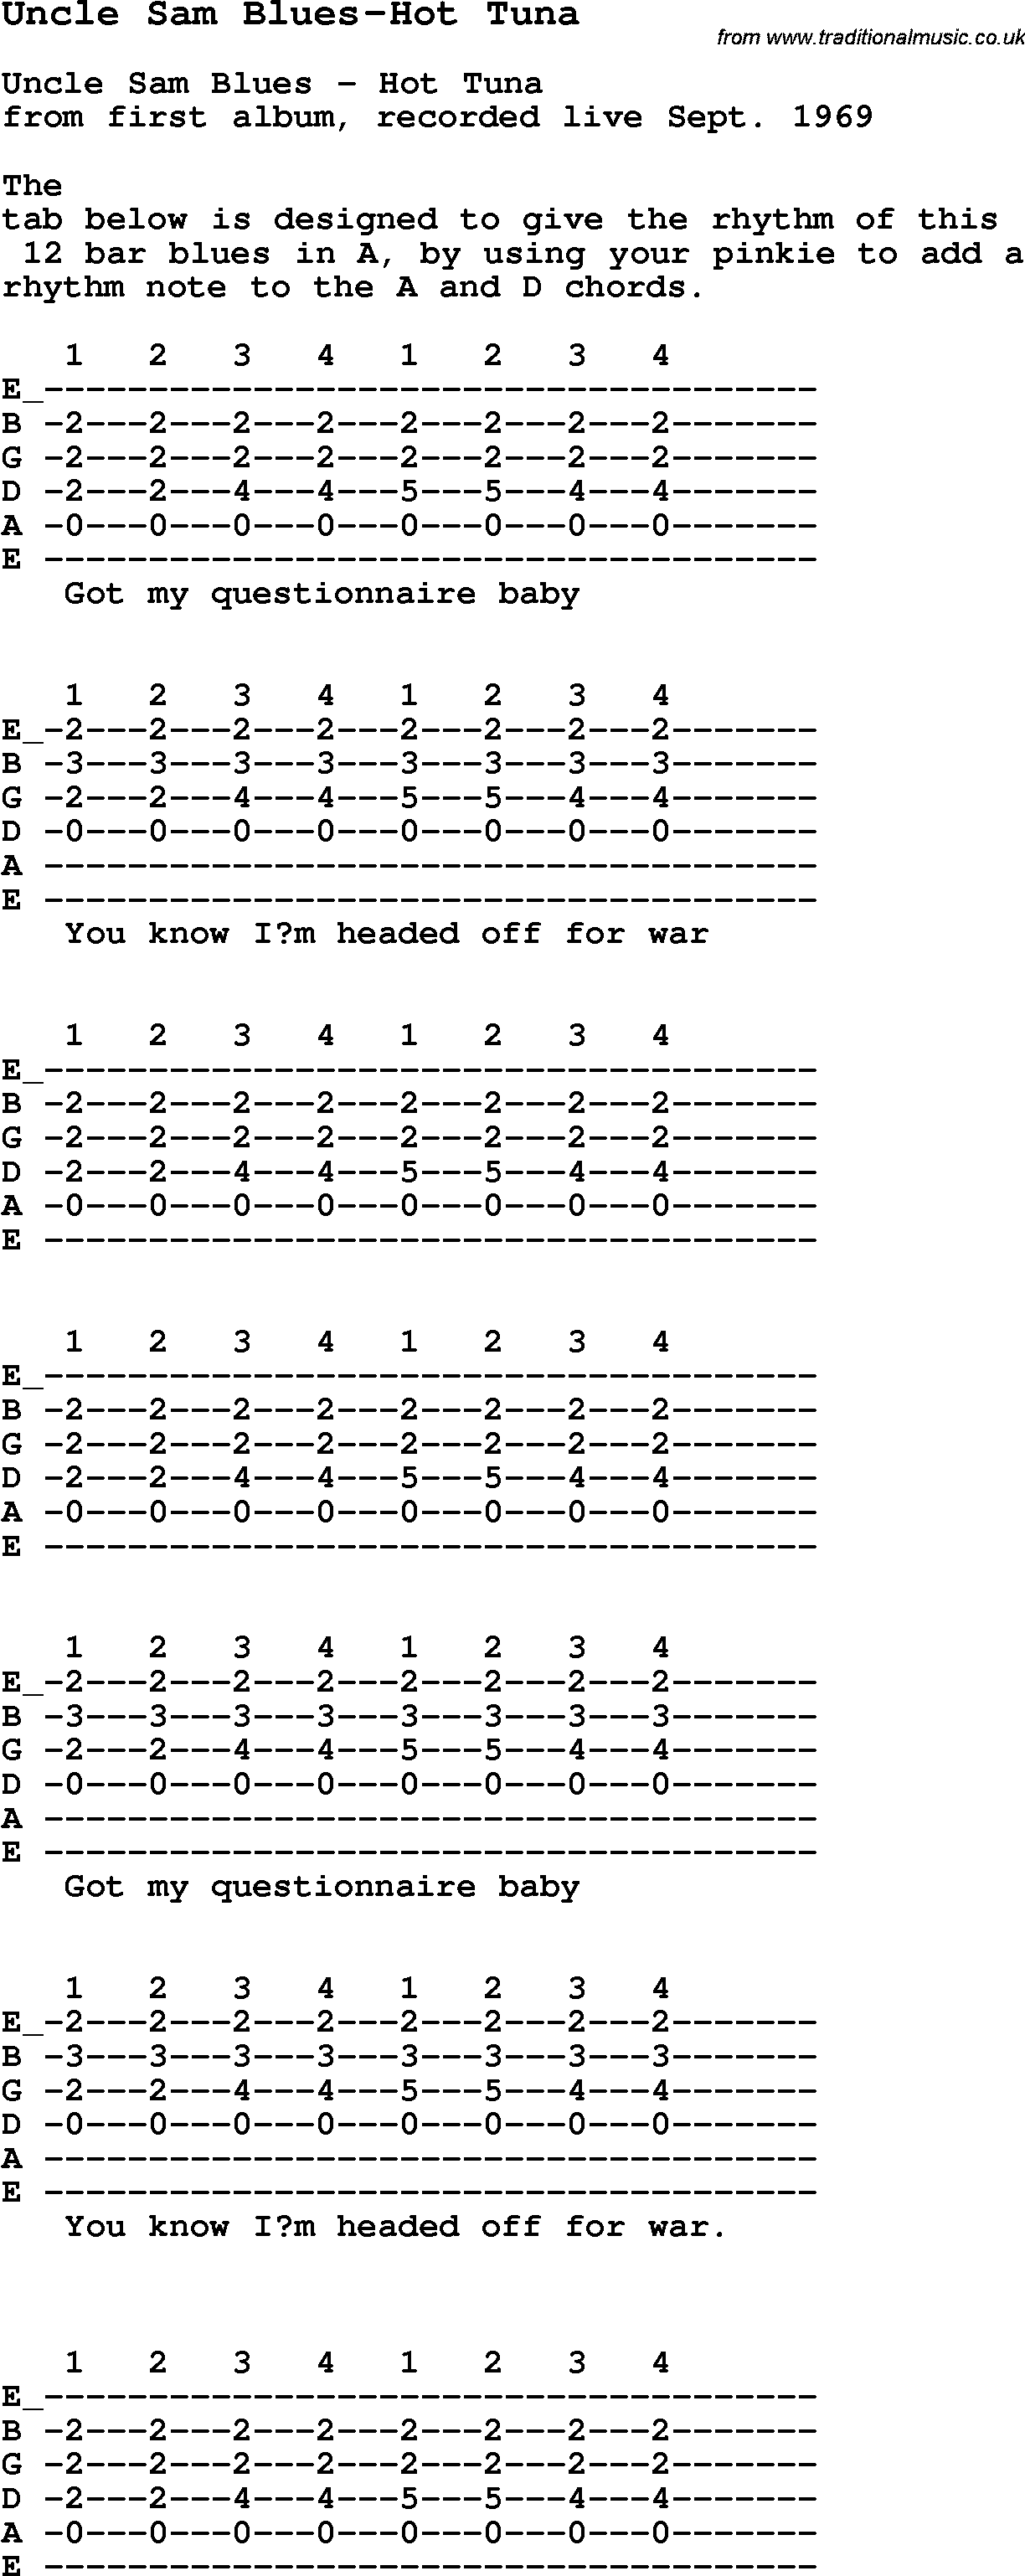 Blues Guitar Song, lyrics, chords, tablature, playing hints for Uncle Sam Blues-Hot Tuna